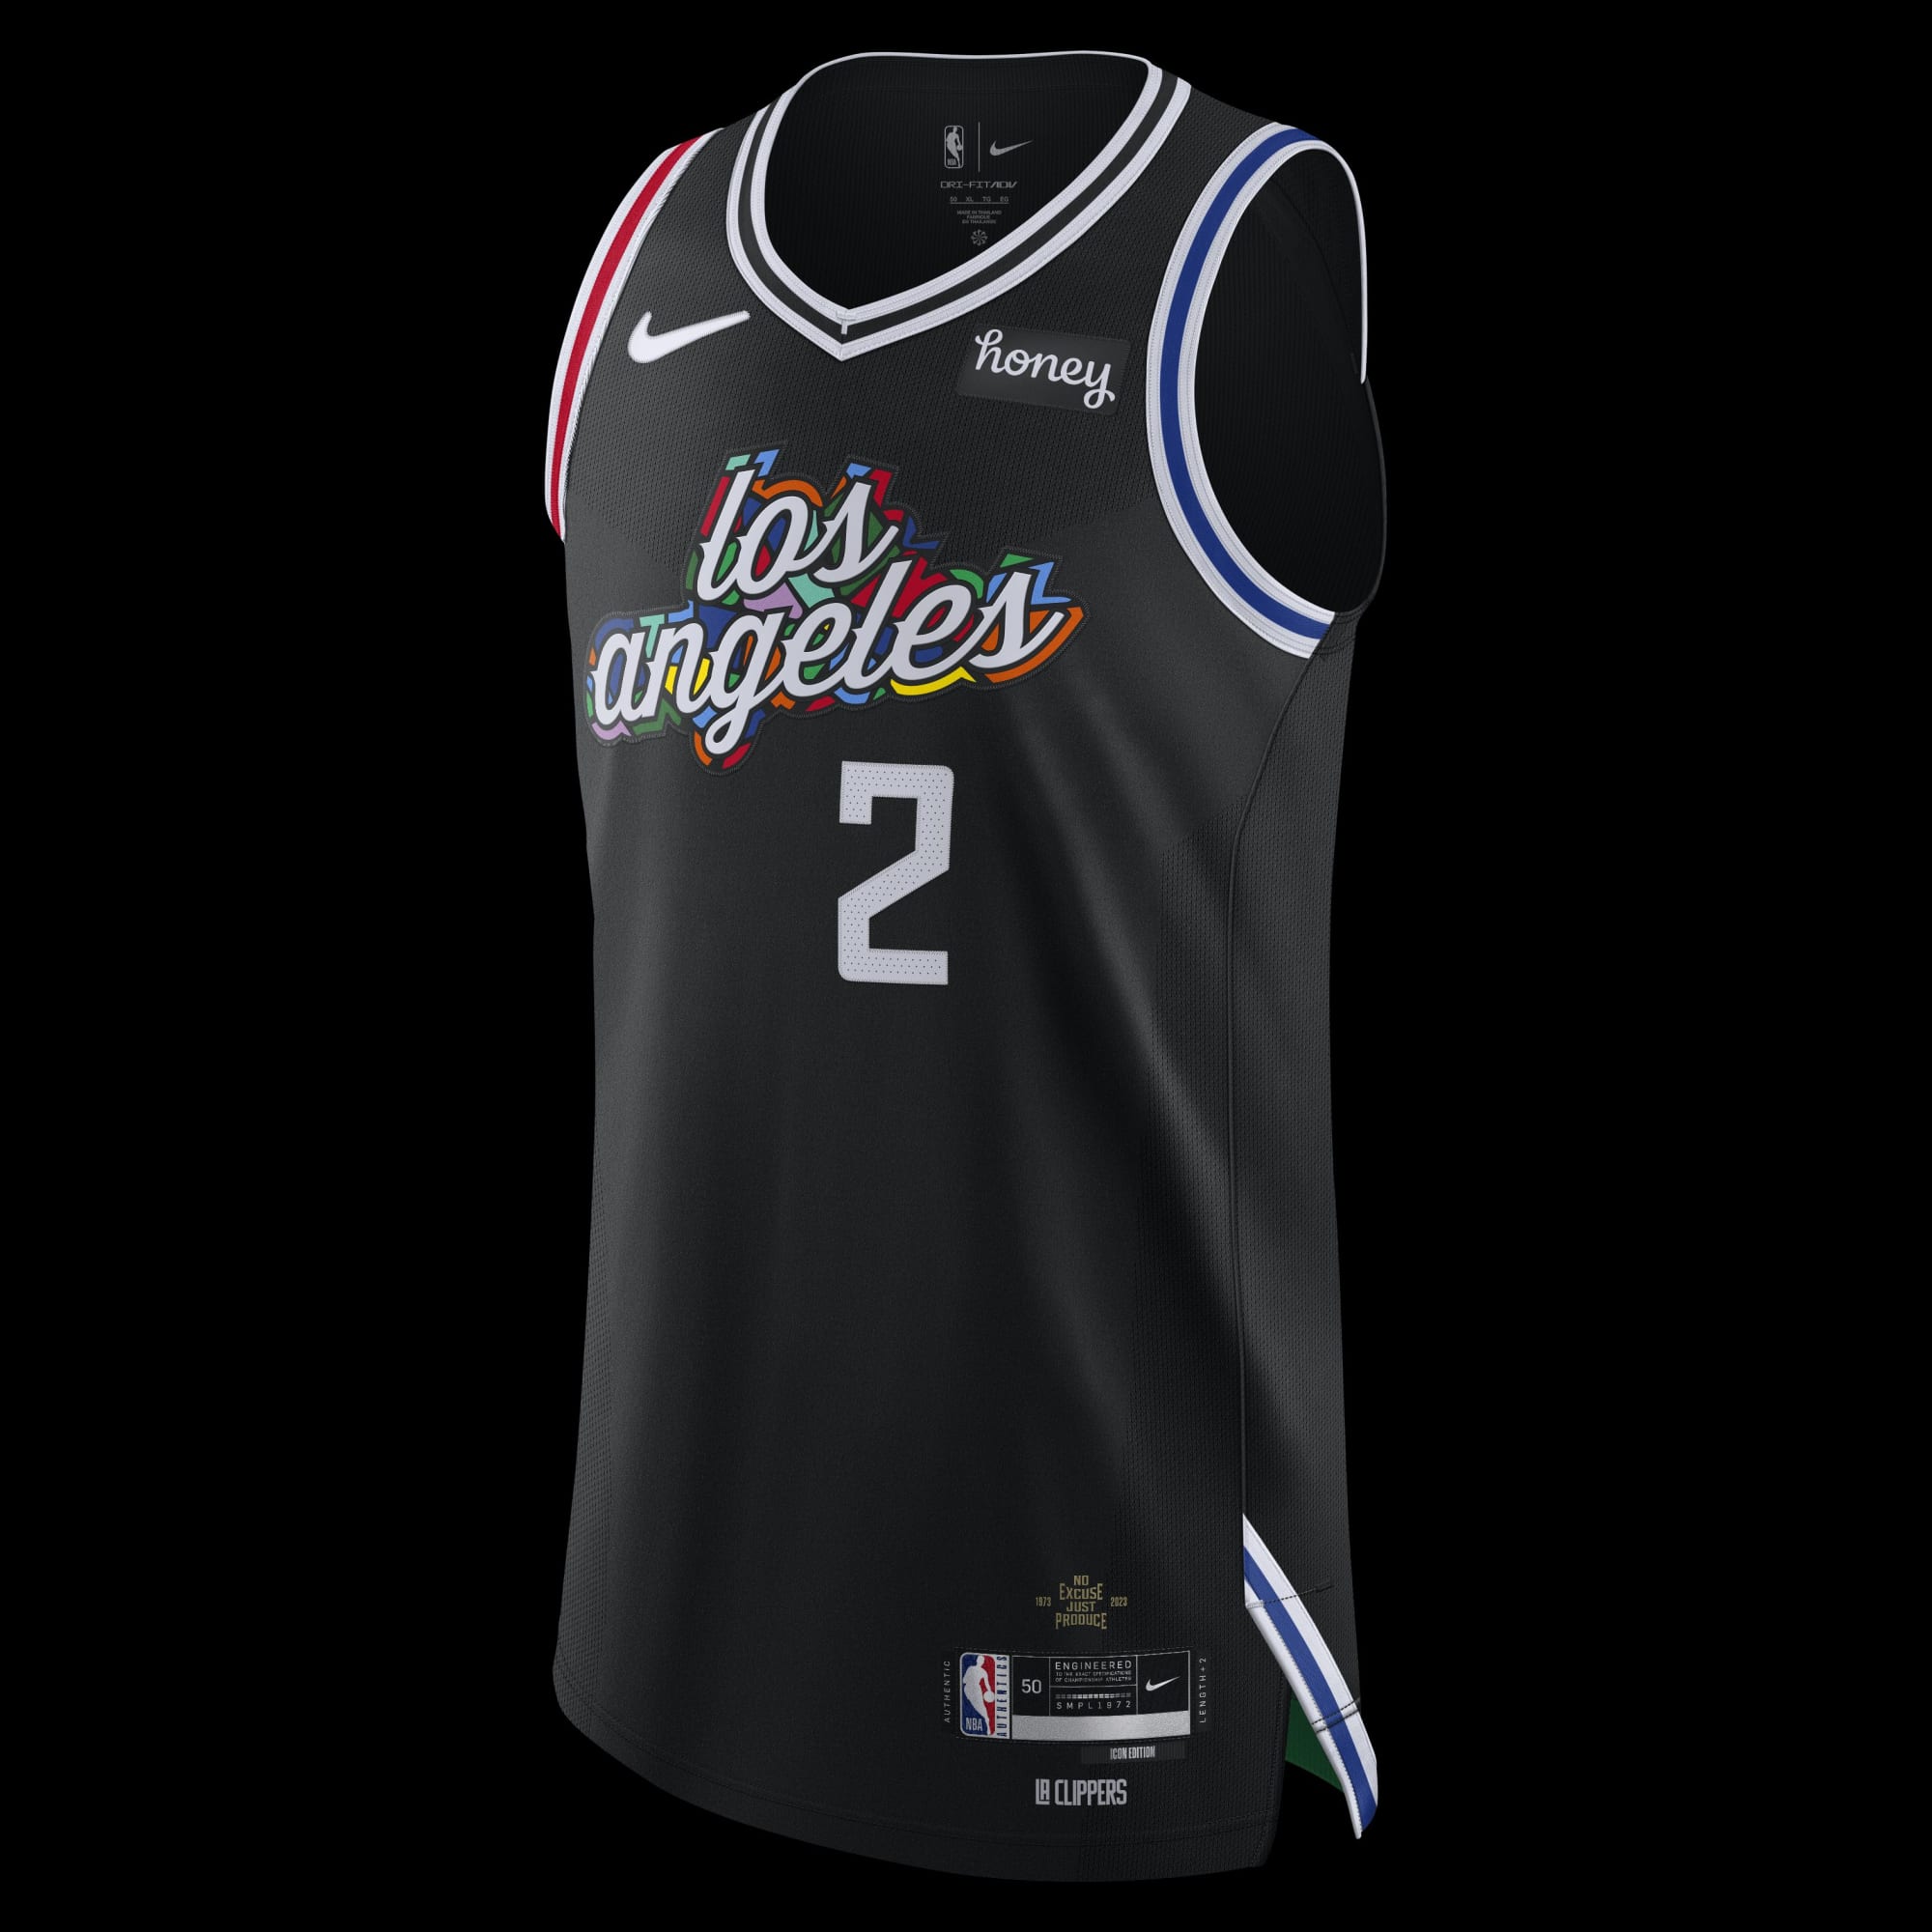 Rumors: LA Clippers City jerseys may have leaked online